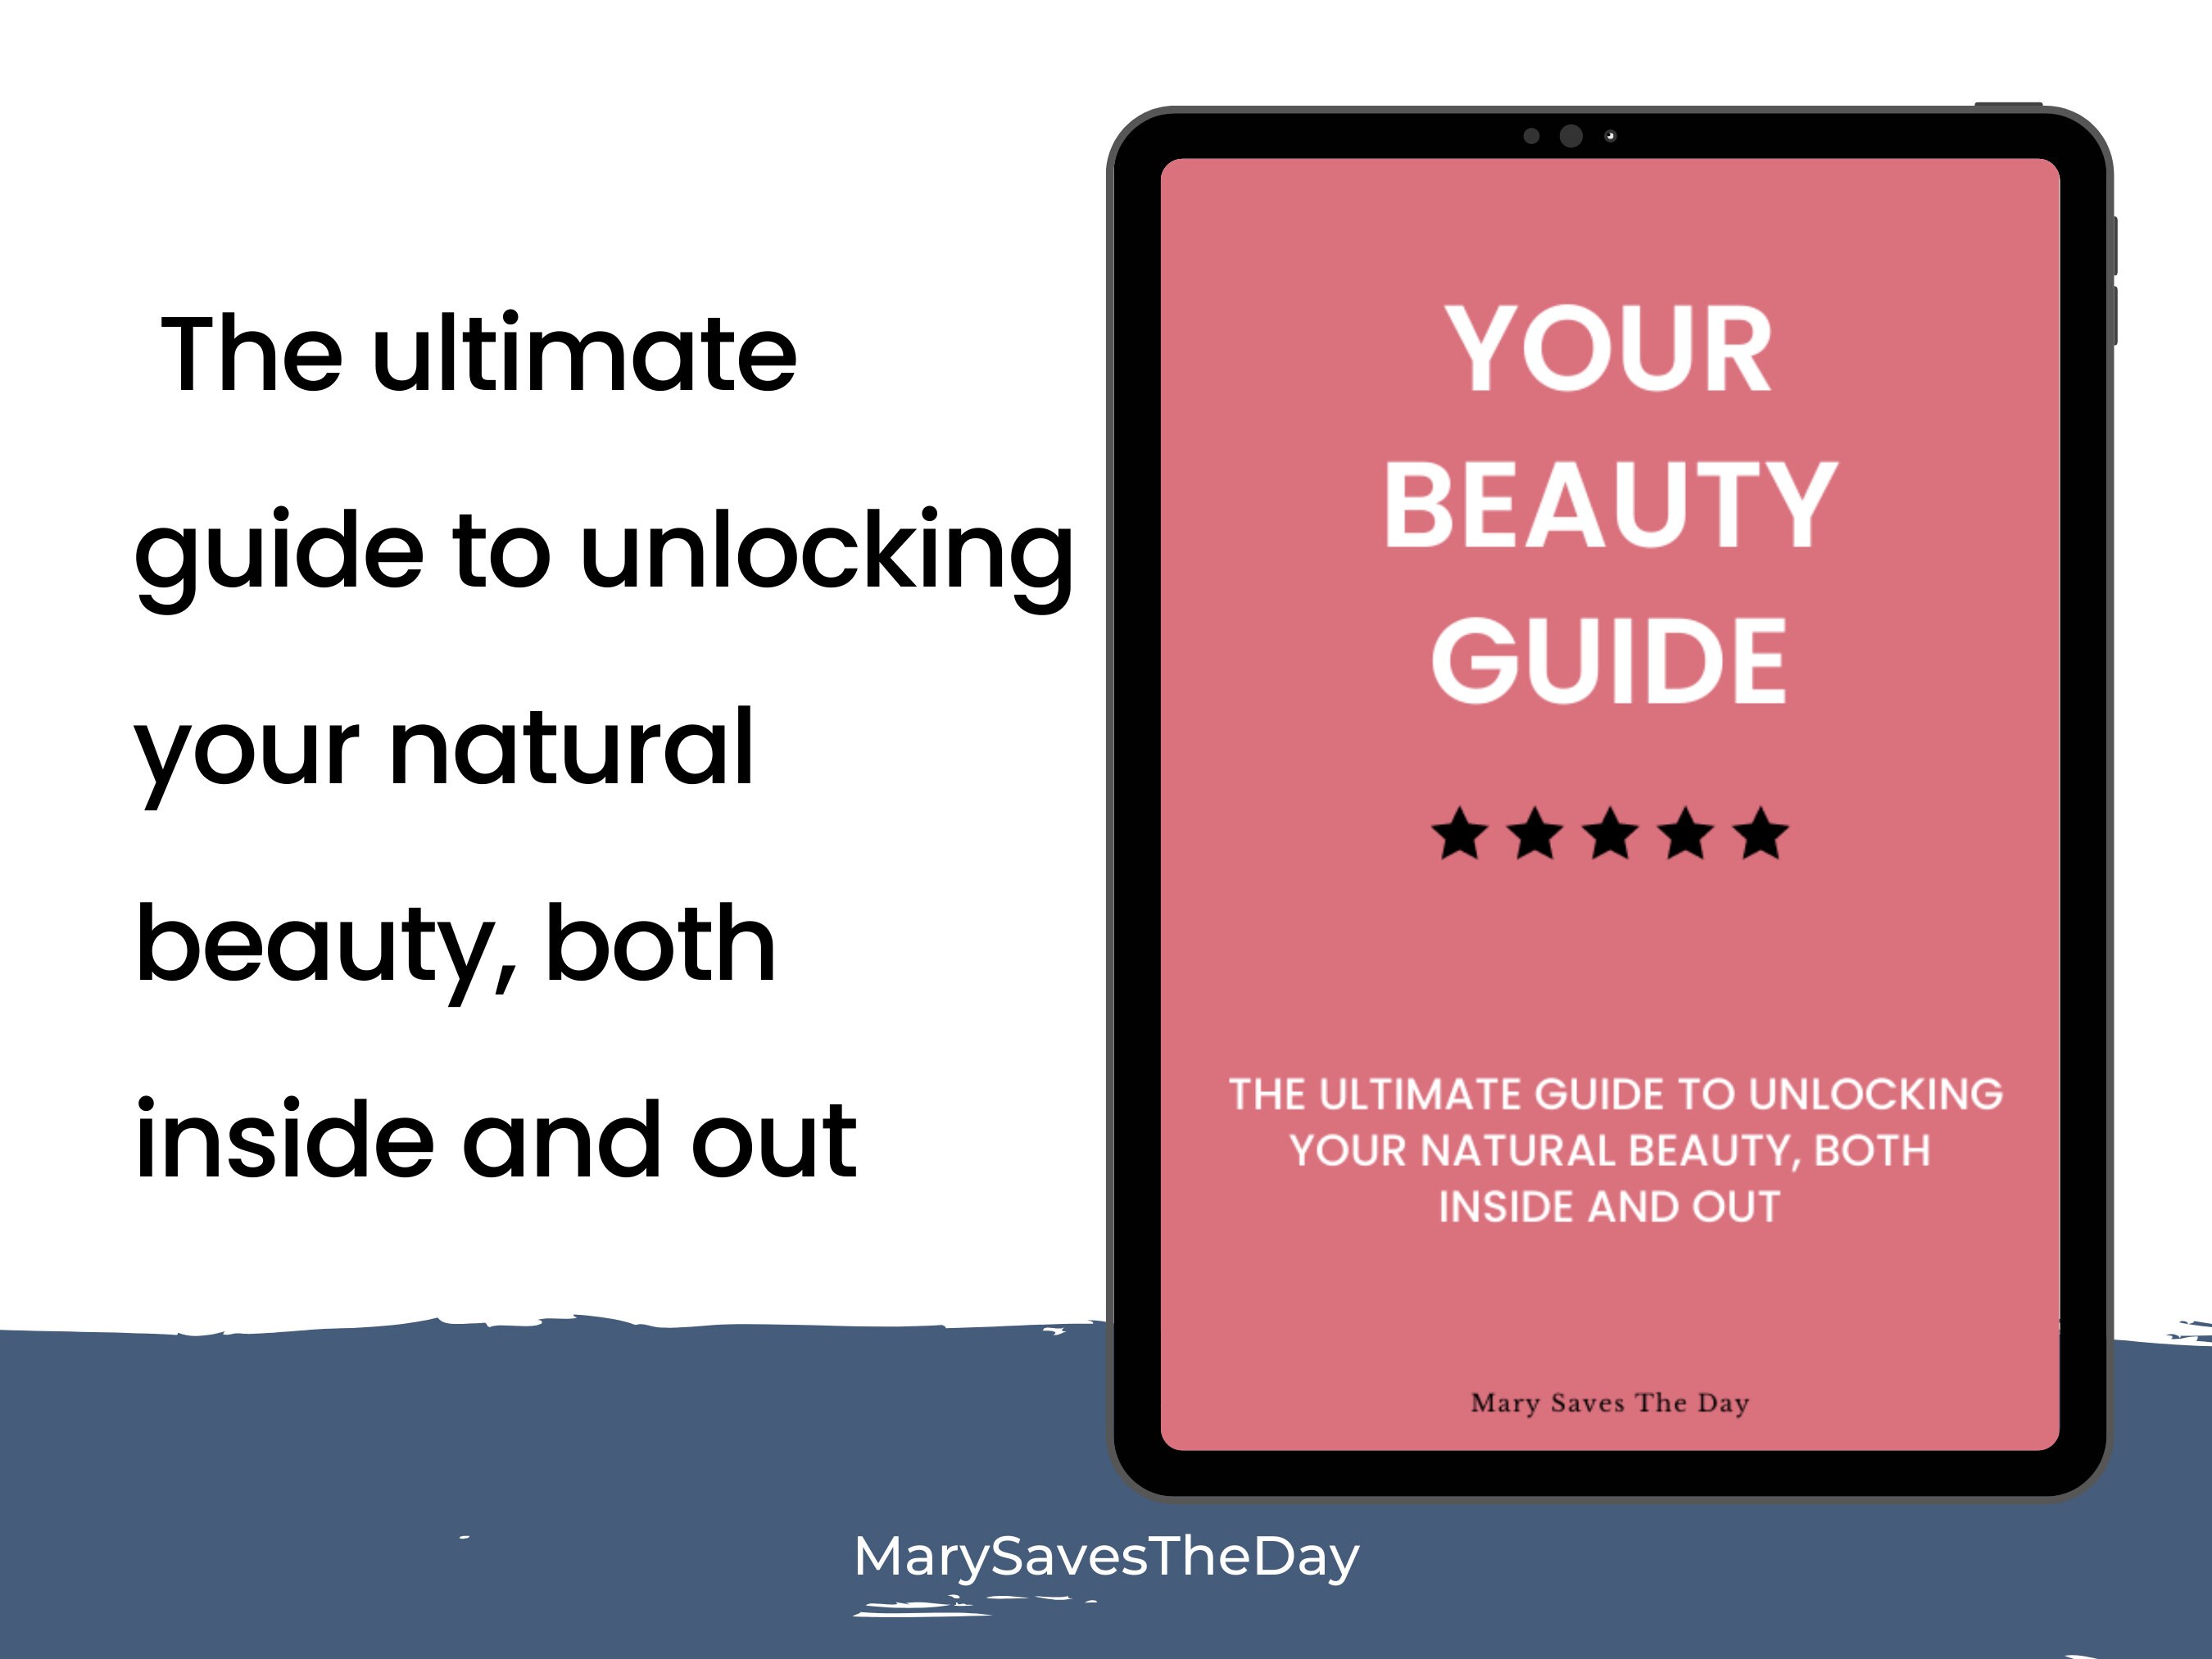 Ultimate　Guide　to　Guide　the　Etsy　Your　Your　Beauty　Unlocking